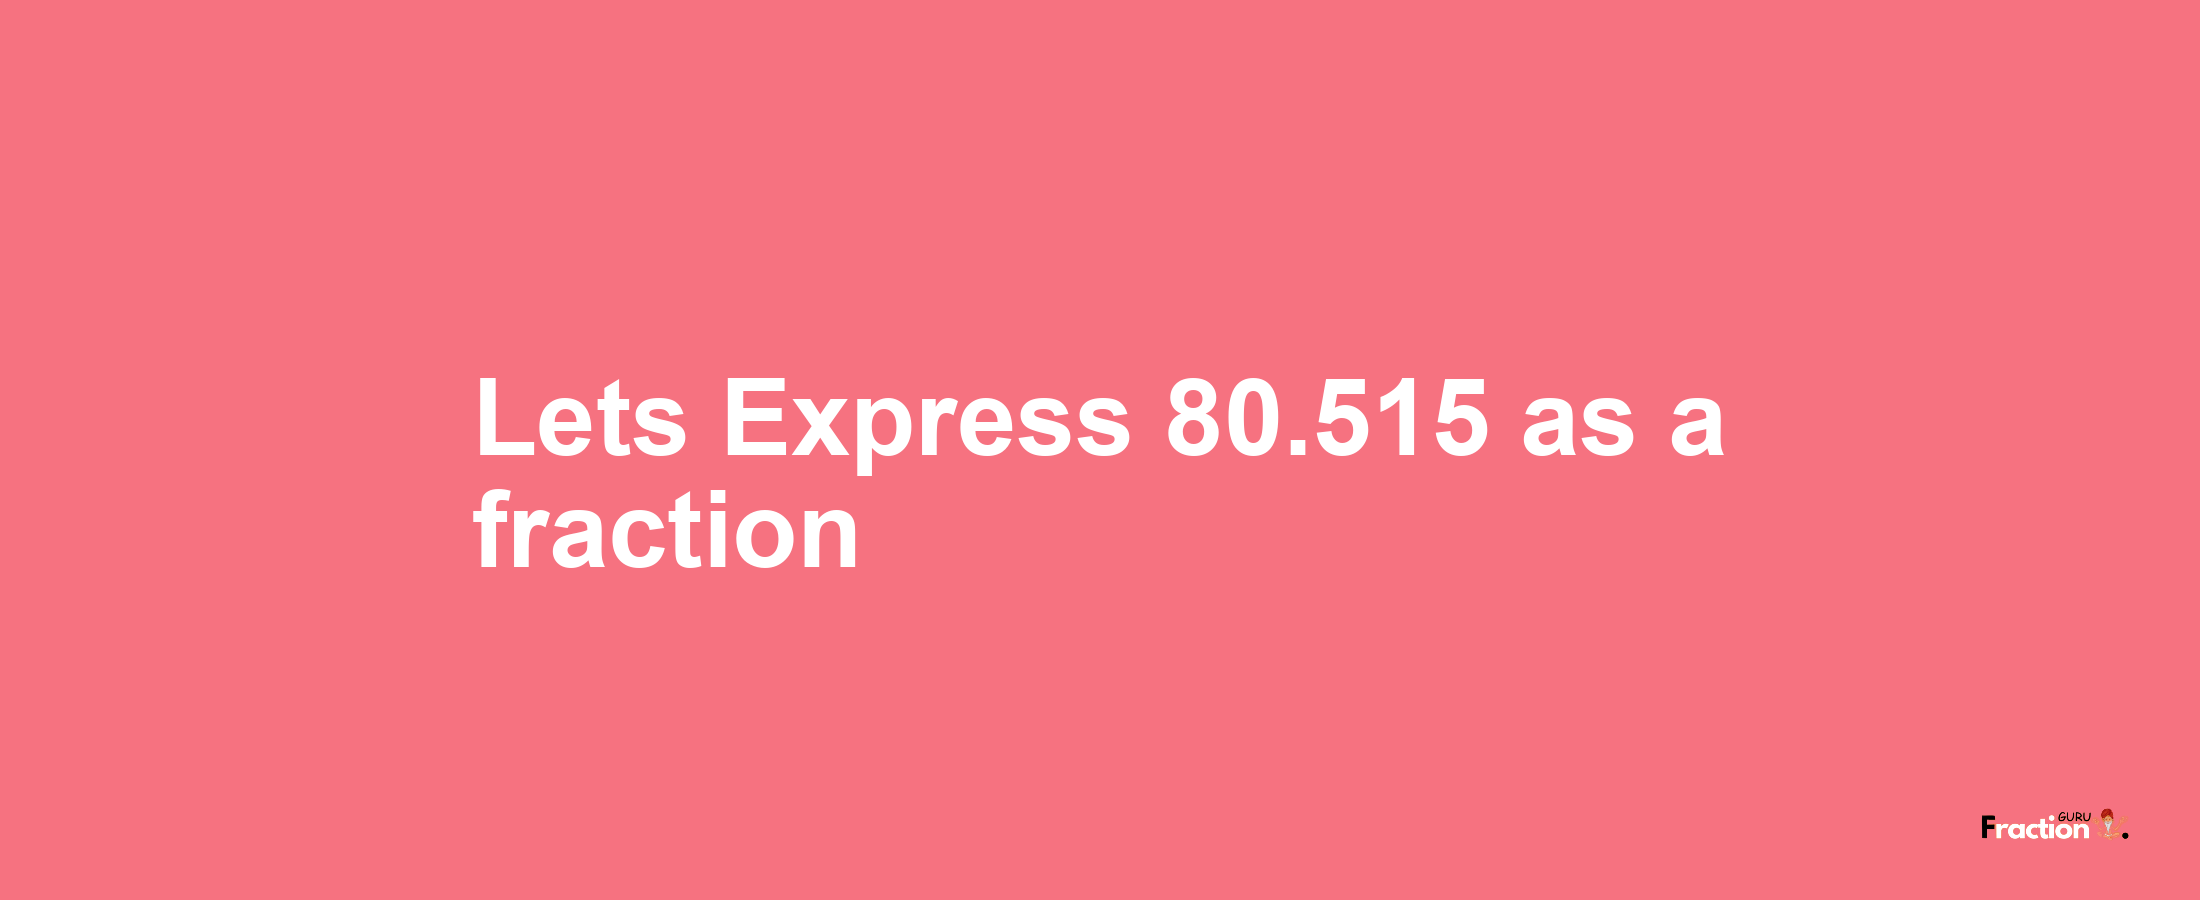 Lets Express 80.515 as afraction